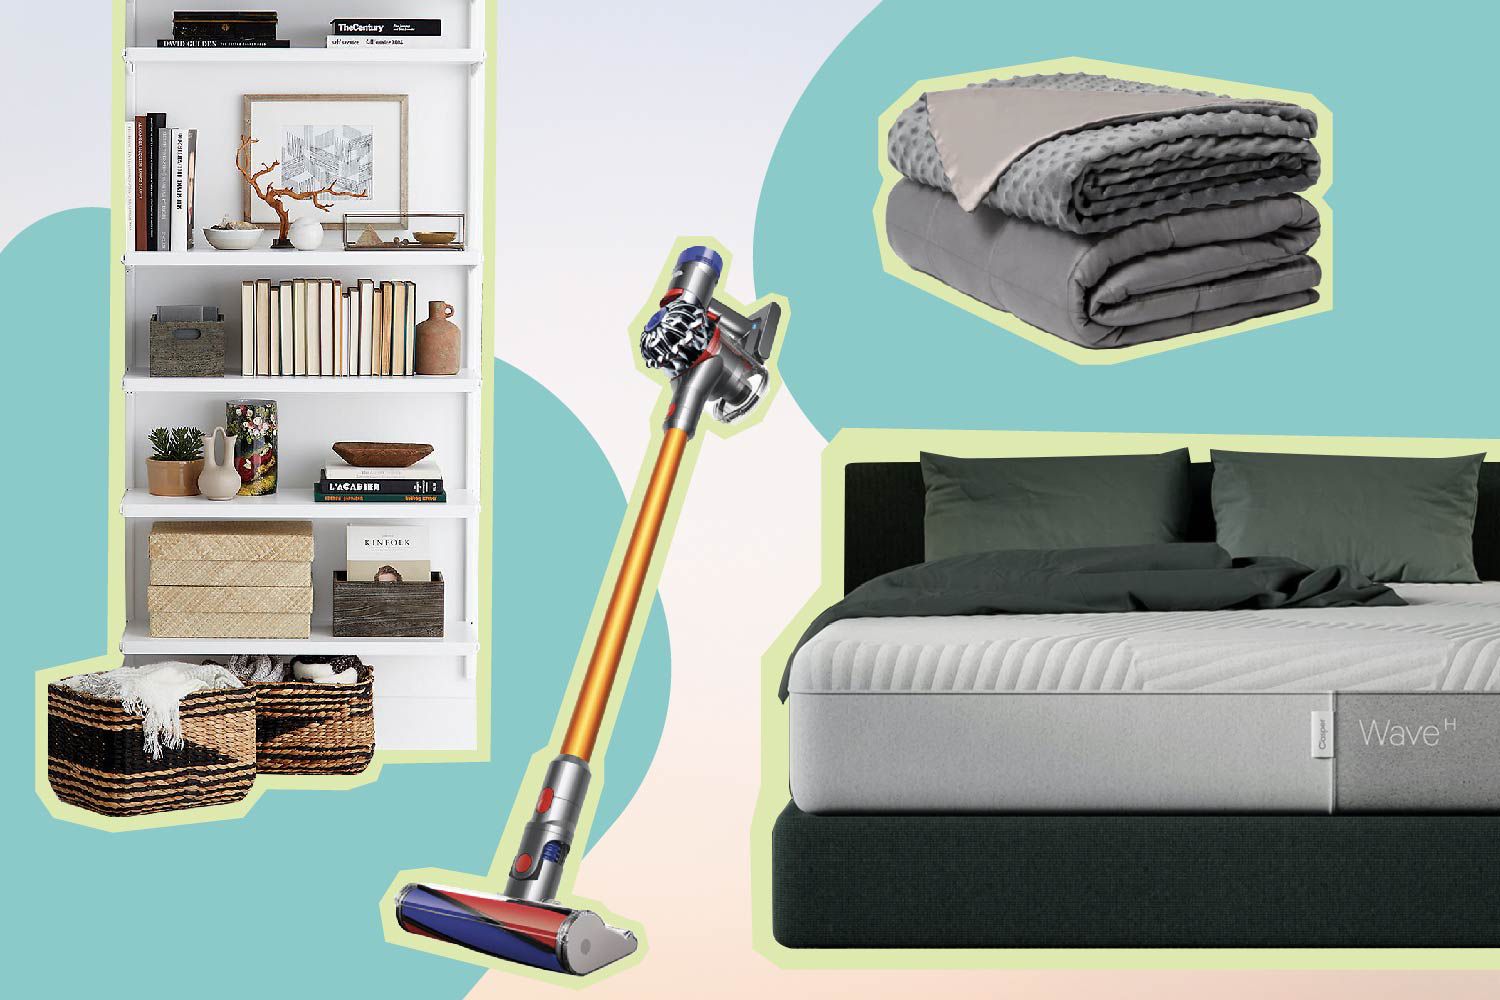 Save Big on Mattresses, Appliances, and More This Labor Day